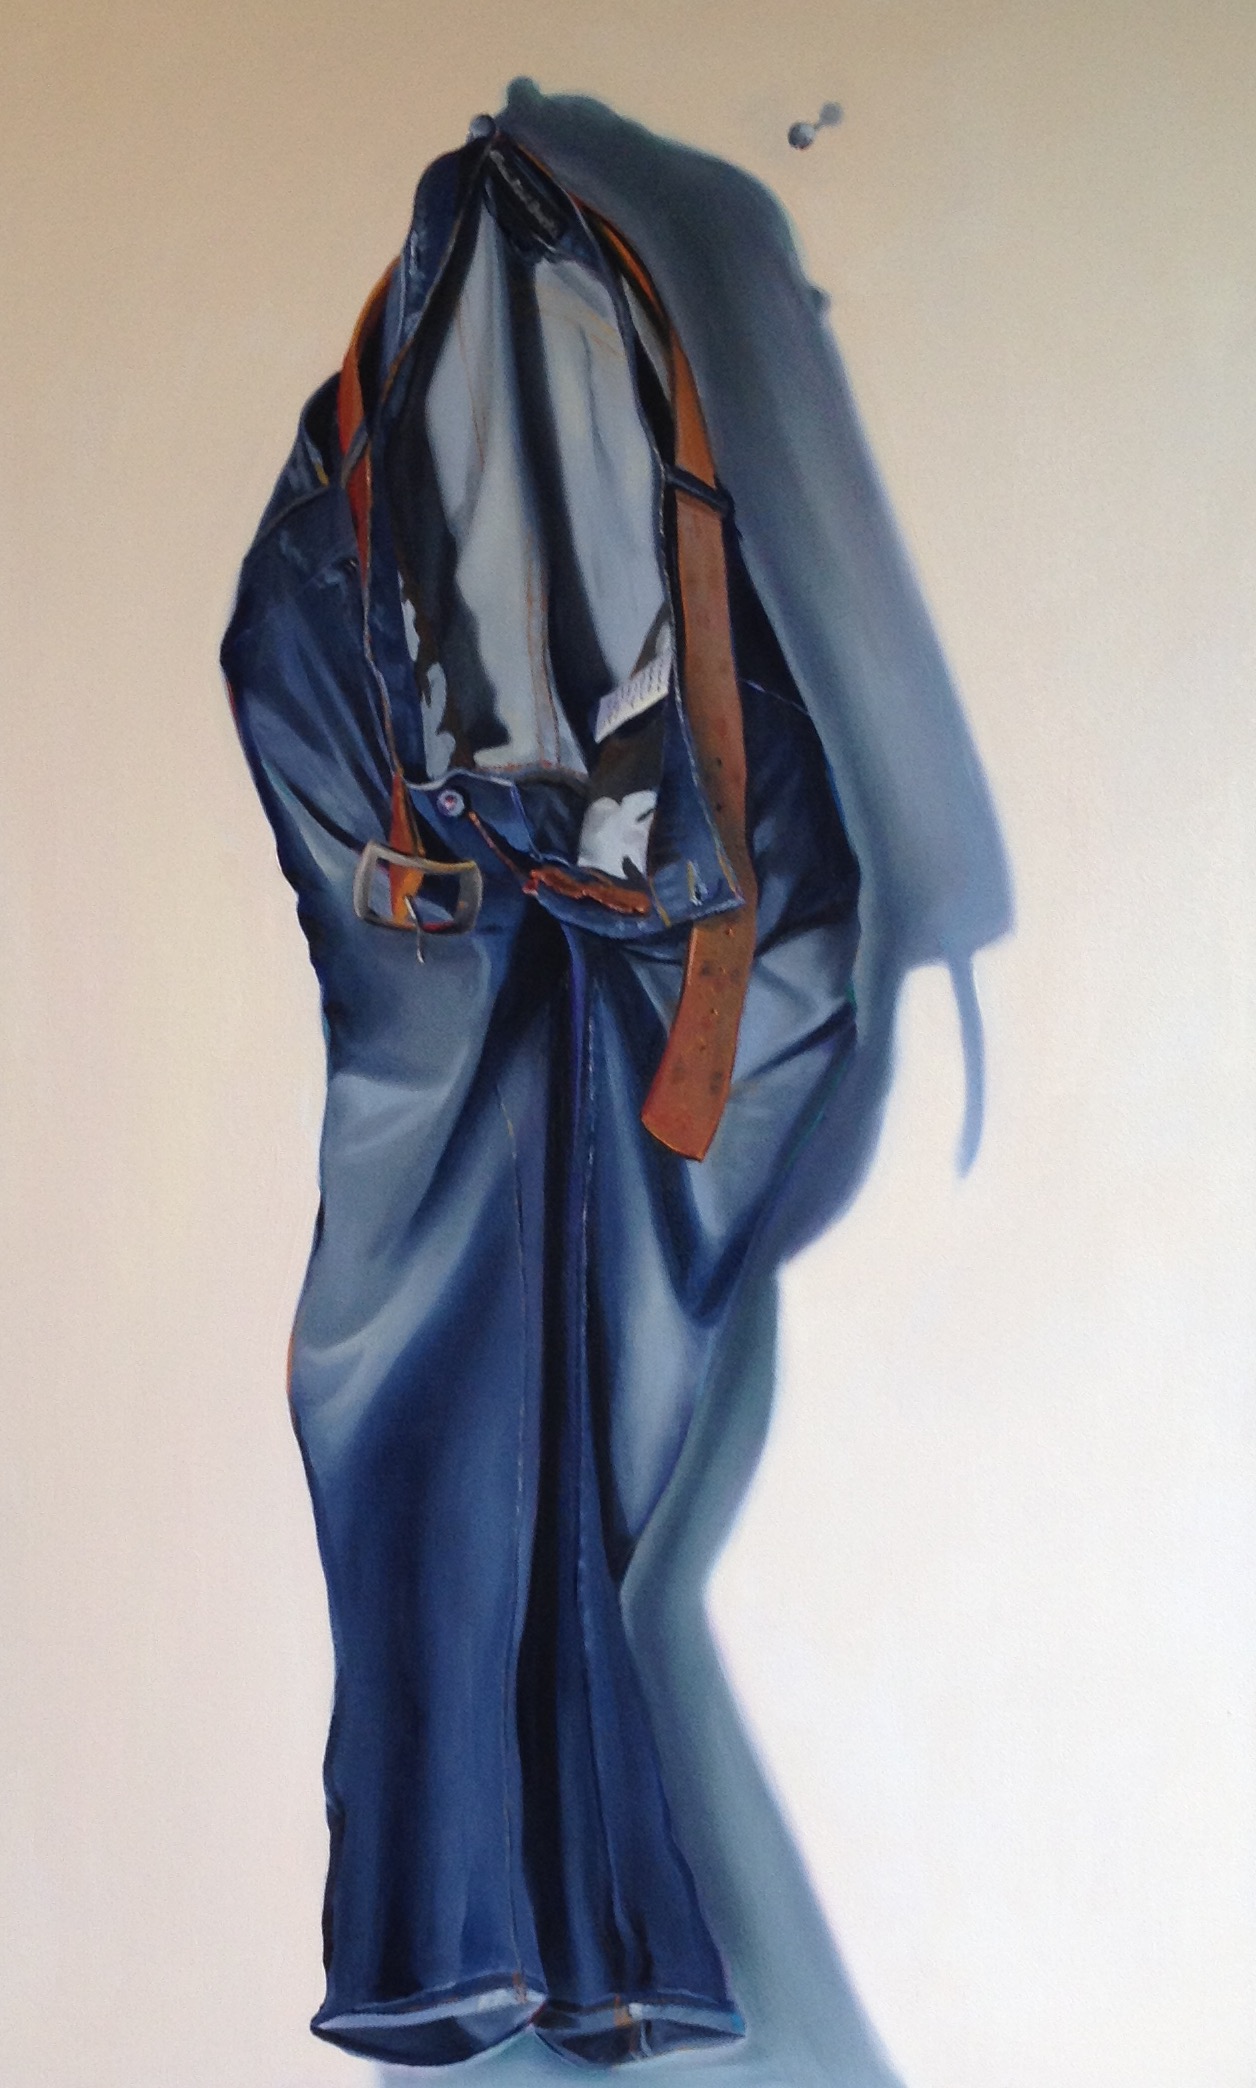 UN-BUCKLED, oil on canvas, 48 x 30 inches